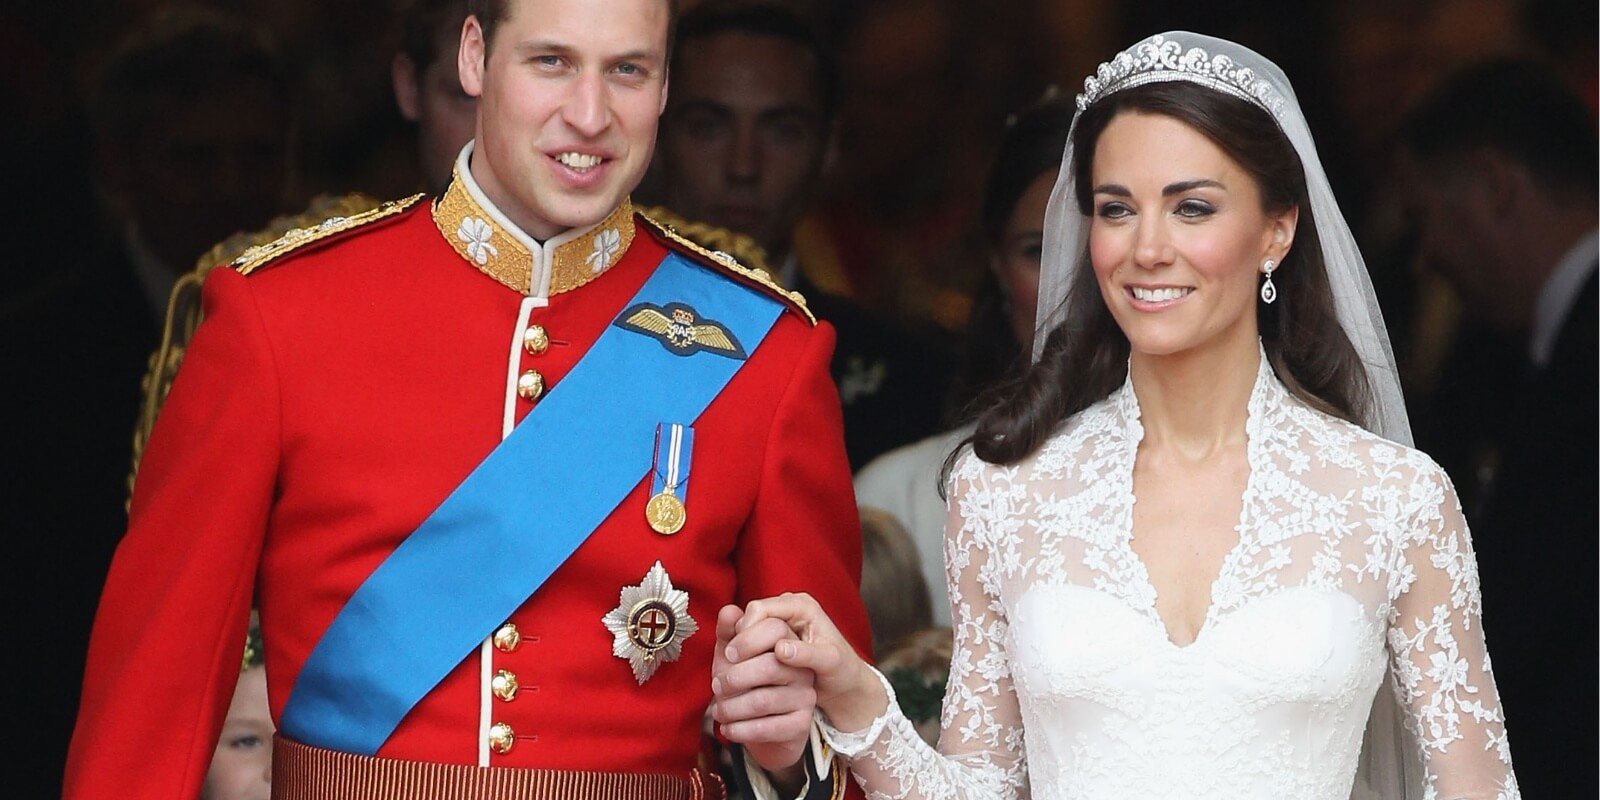 Prince William and Kate Middleton on their wedding day, April 29, 2011